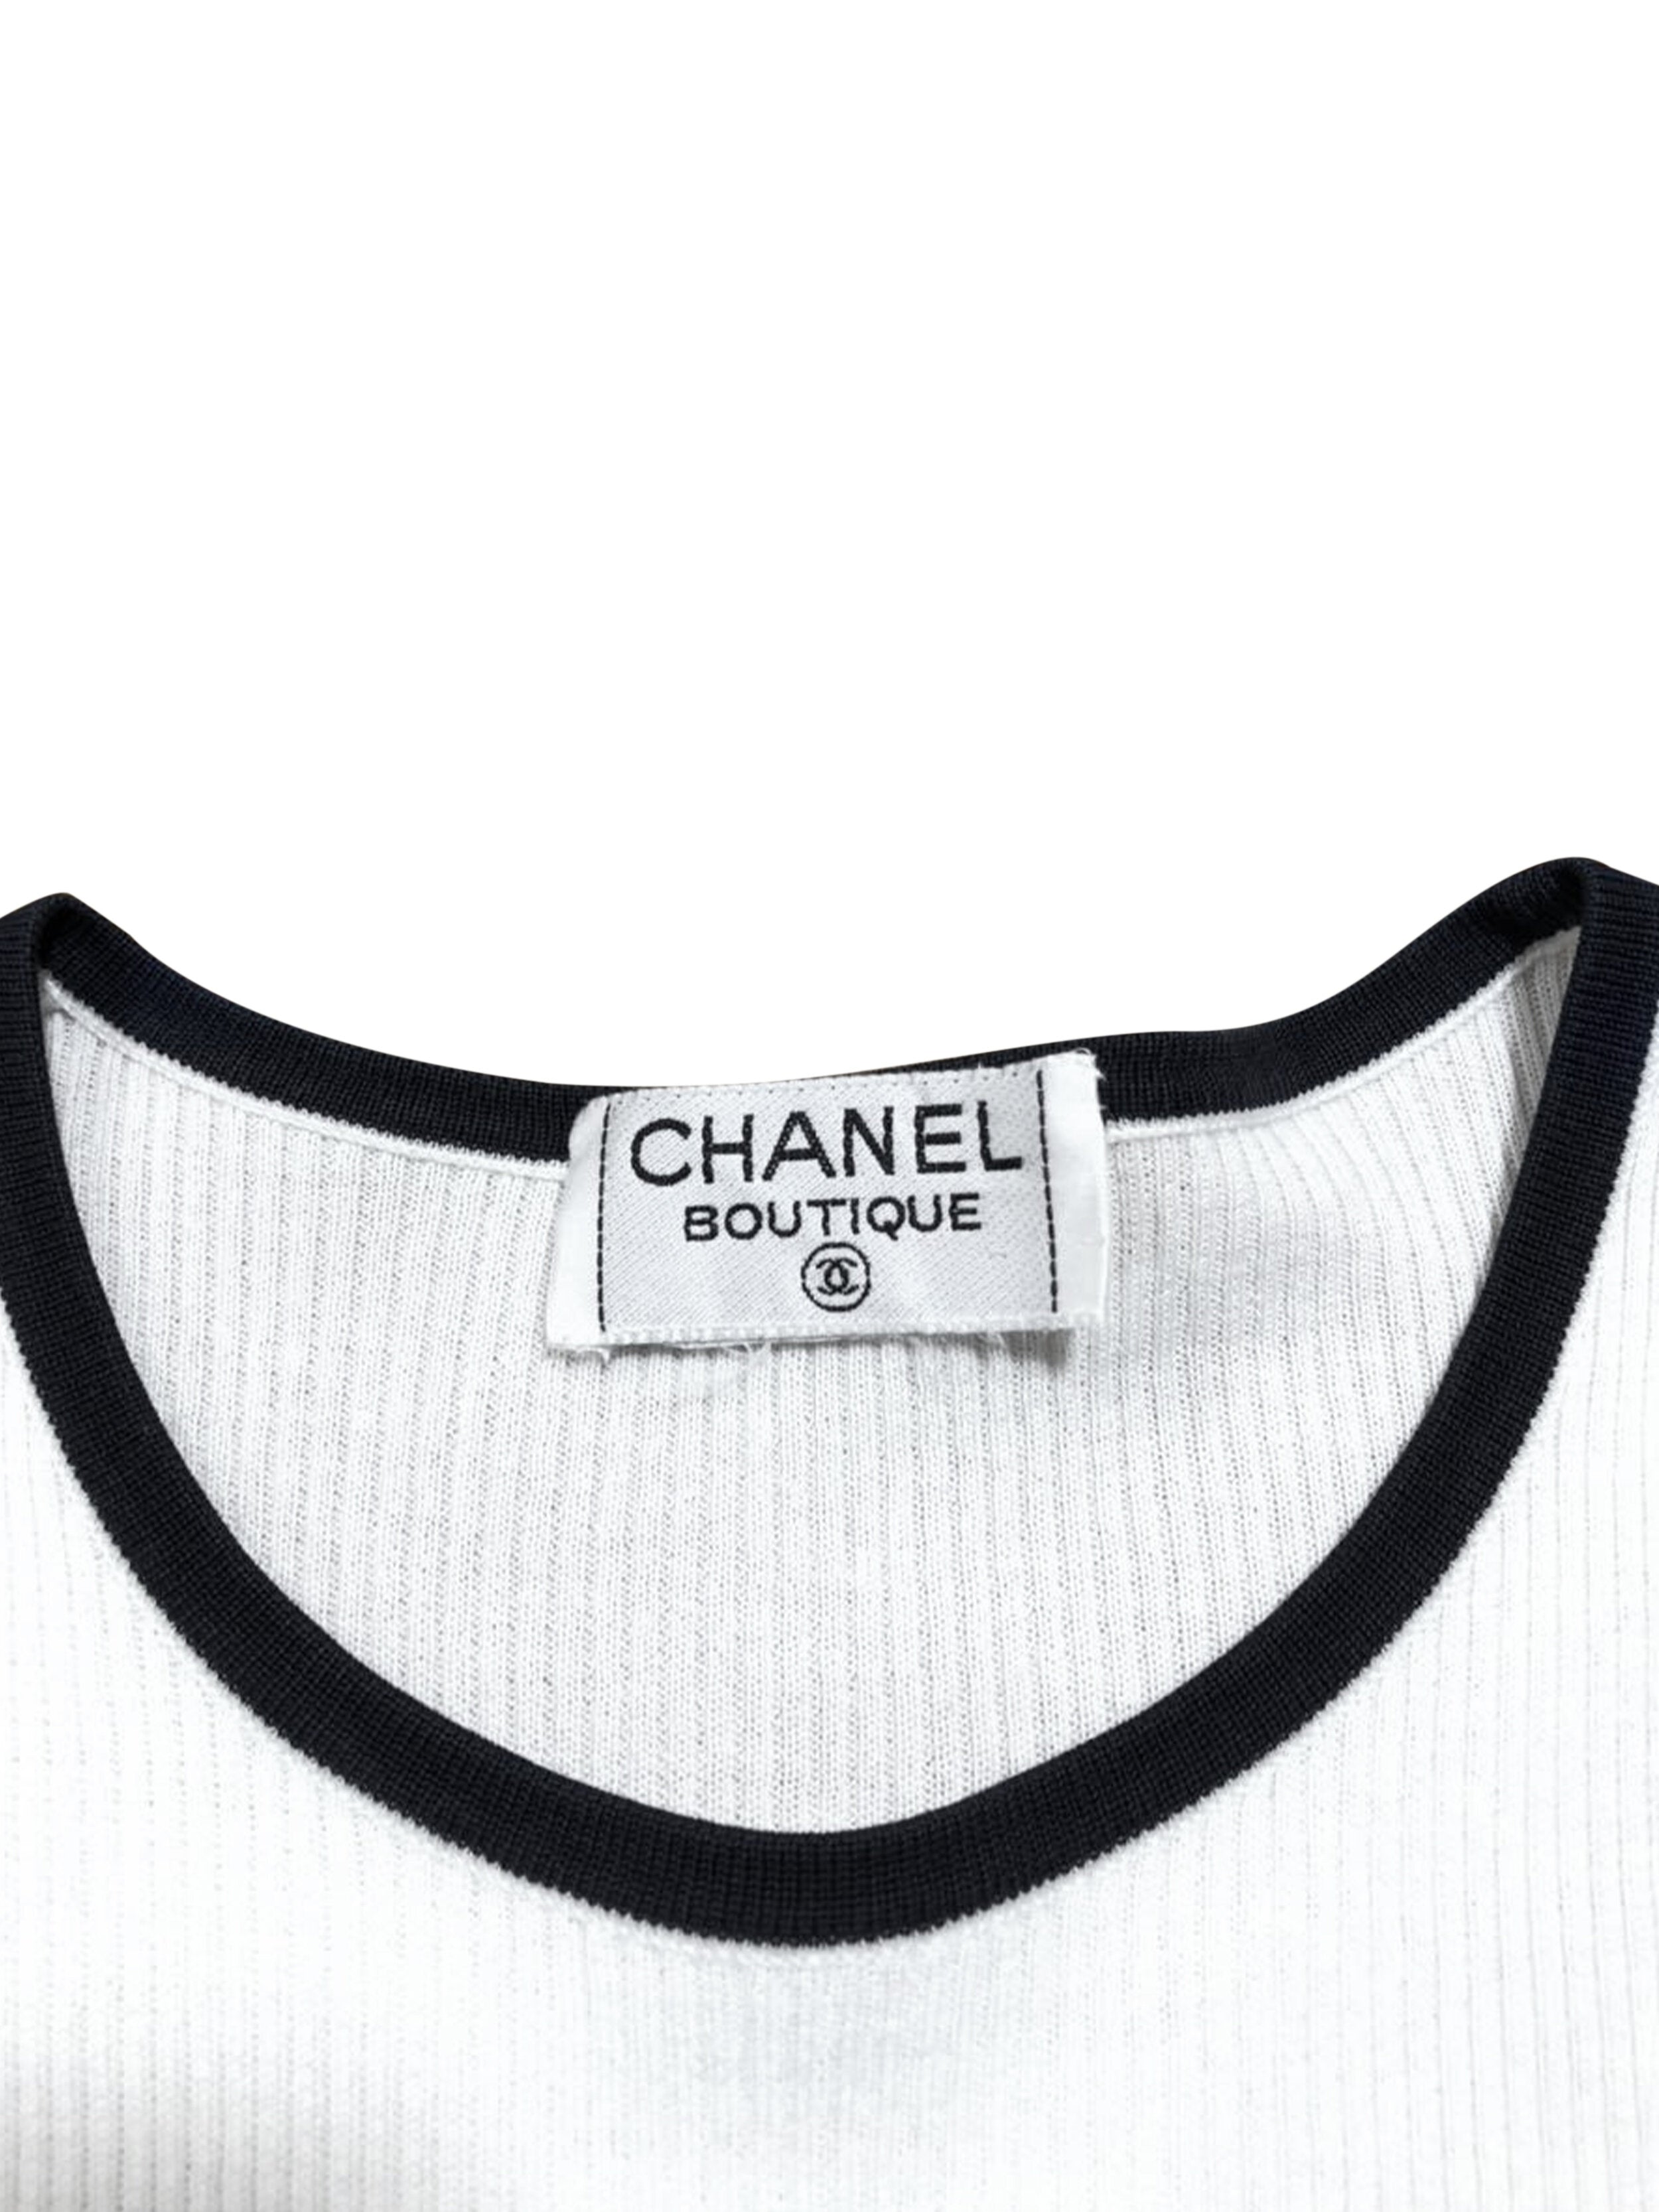 white and black fall shirt chanel